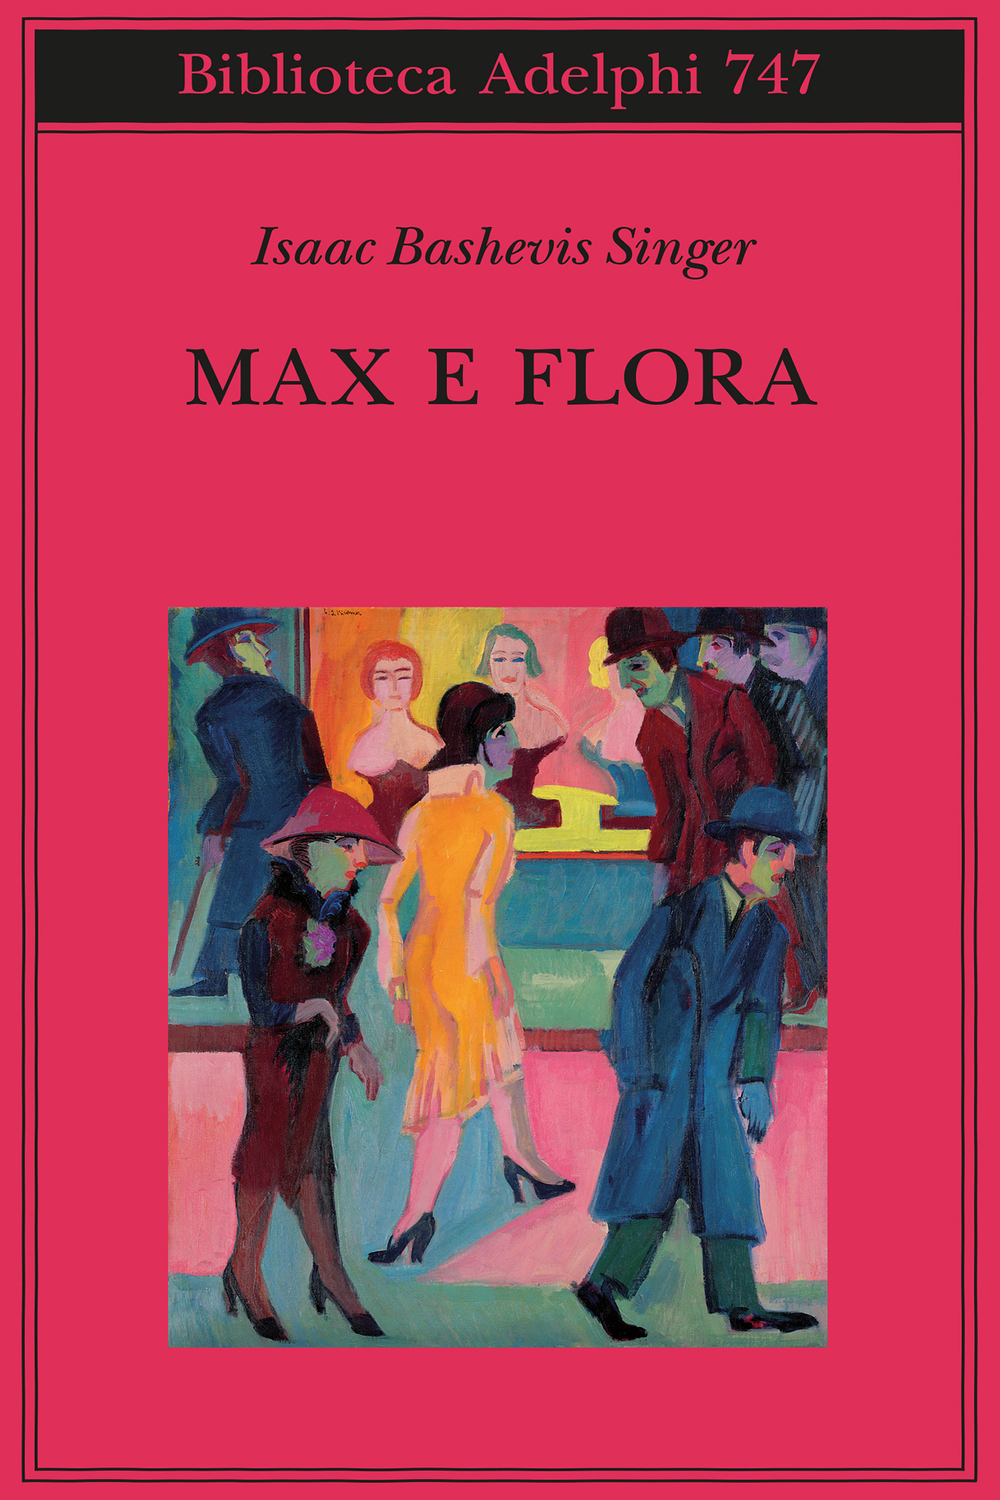 recensione - max e flora - isaac bashevis singer